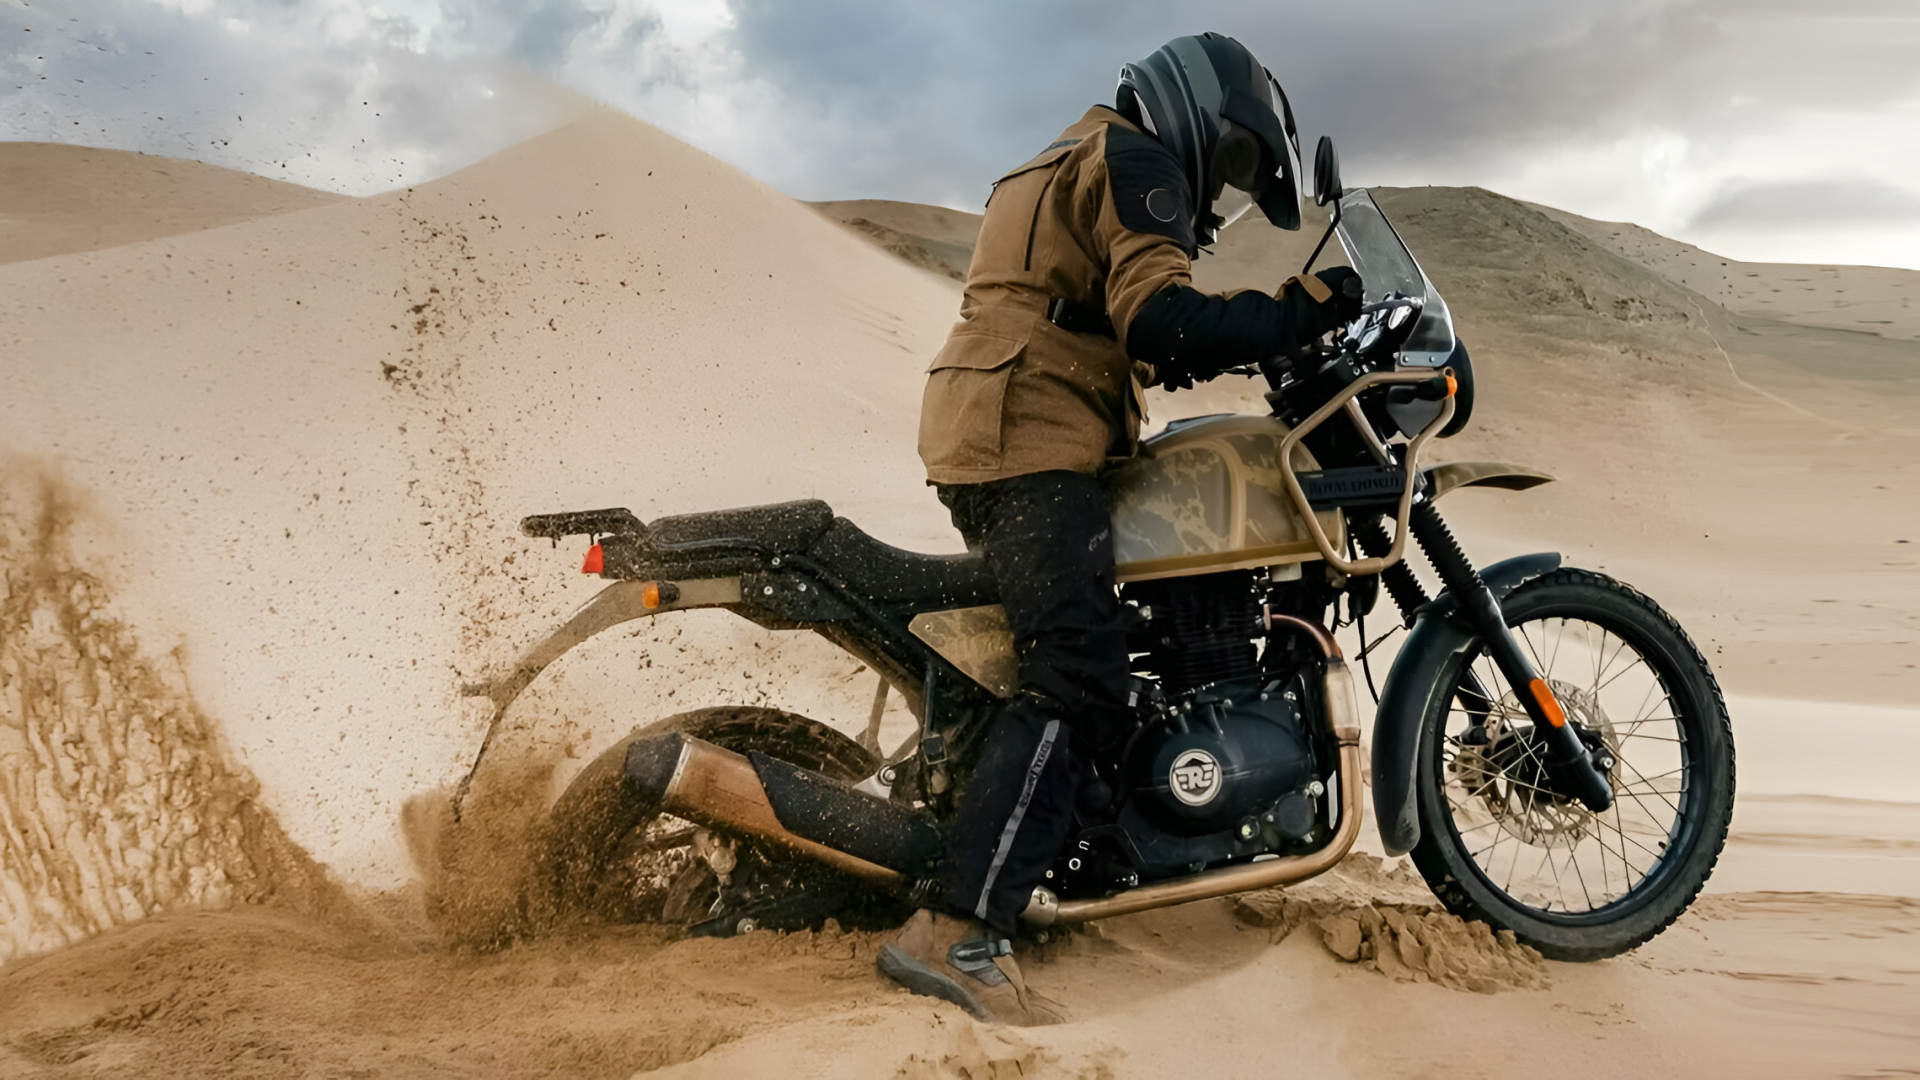 Royal Enfield off-roading in the sand dunes